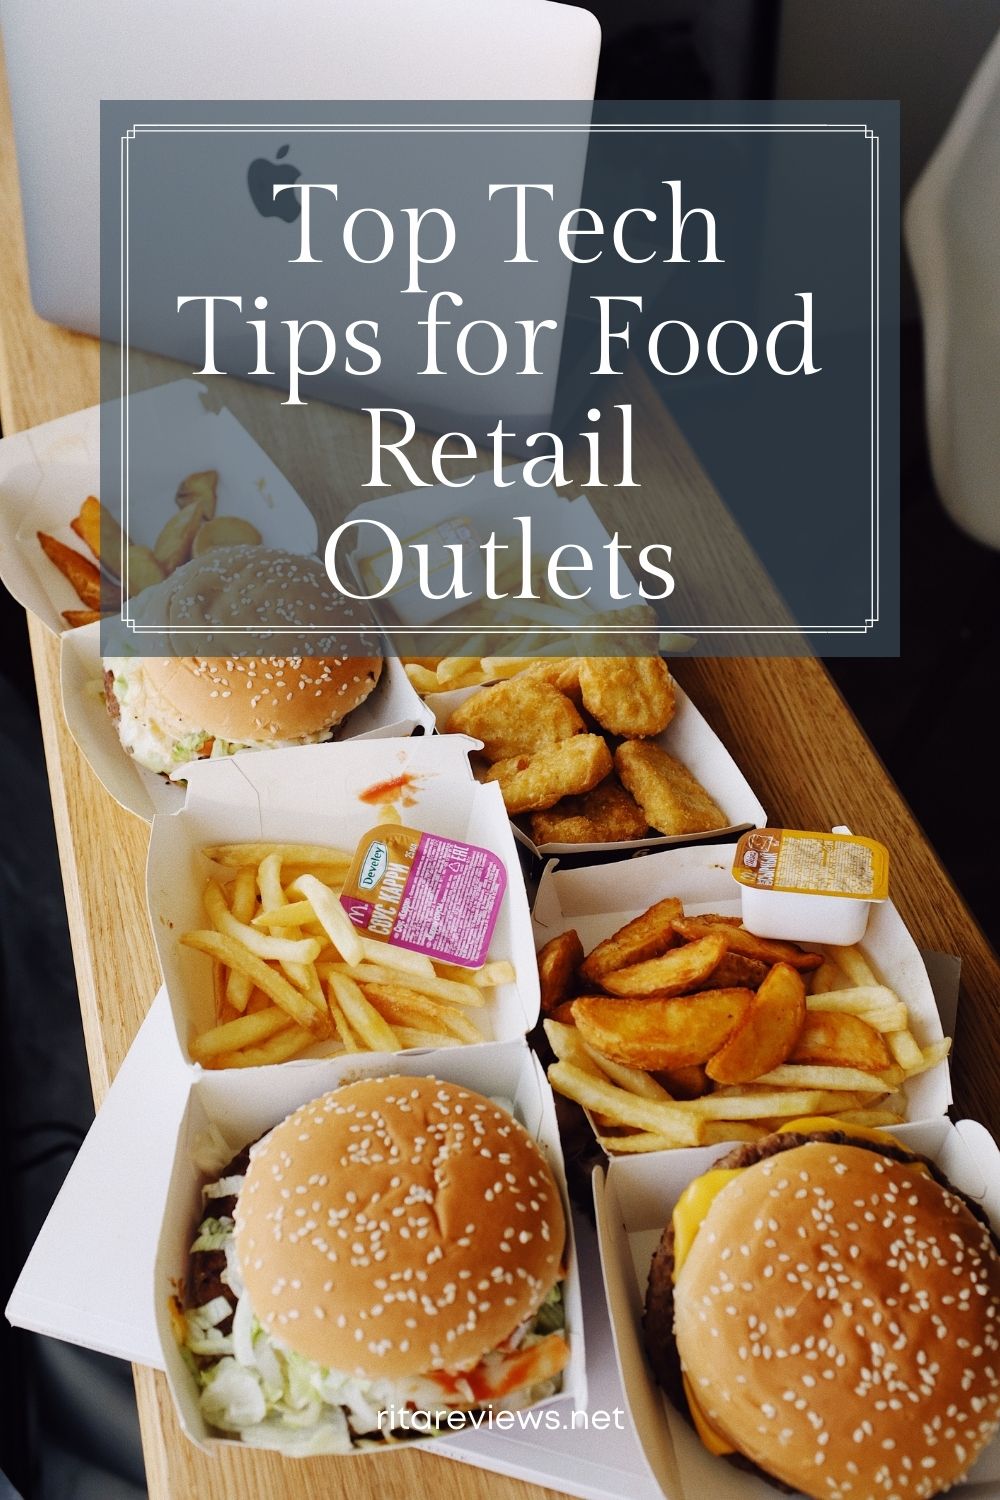 Top Tech Tips for Food Retail Outlets